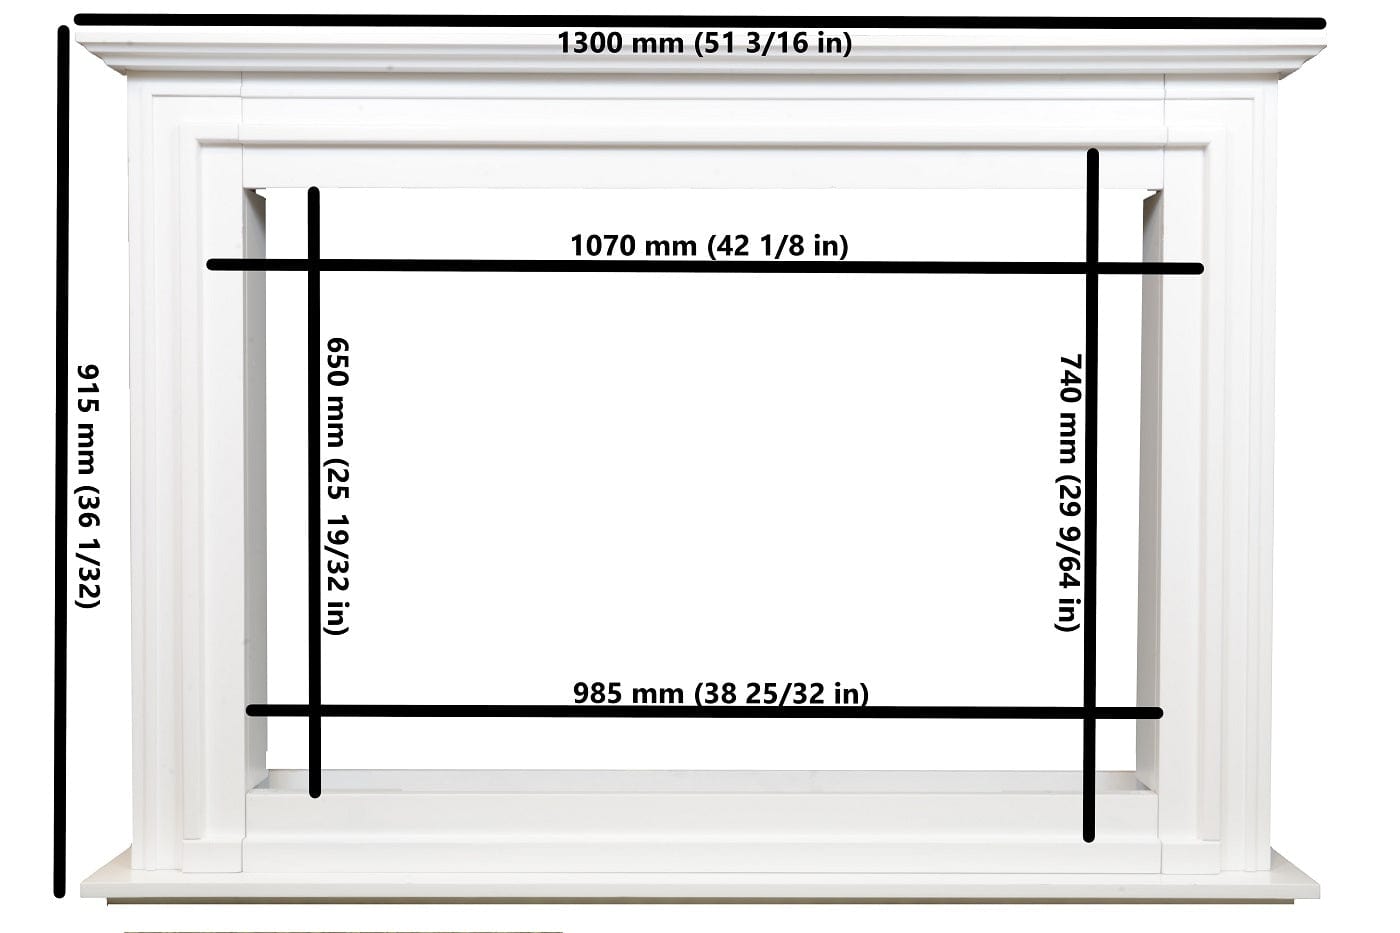 Dimensions of the Touchstone Encase Surround Mantel for the Sideline Elite Forte Smart Electric Fireplace